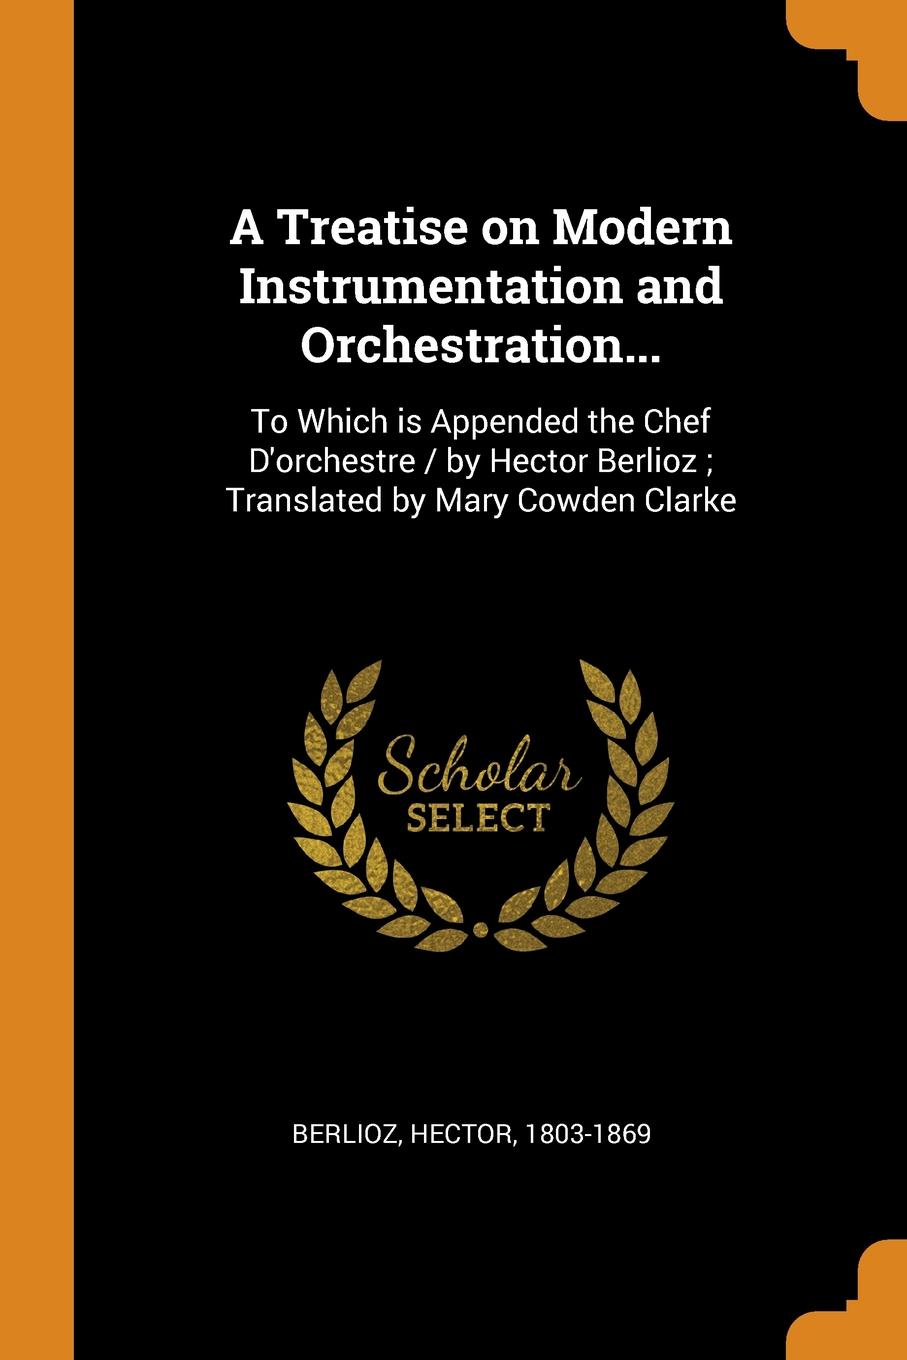 A Treatise on Modern Instrumentation and Orchestration... To Which is Appended the Chef D.orchestre / by Hector Berlioz ; Translated by Mary Cowden Clarke